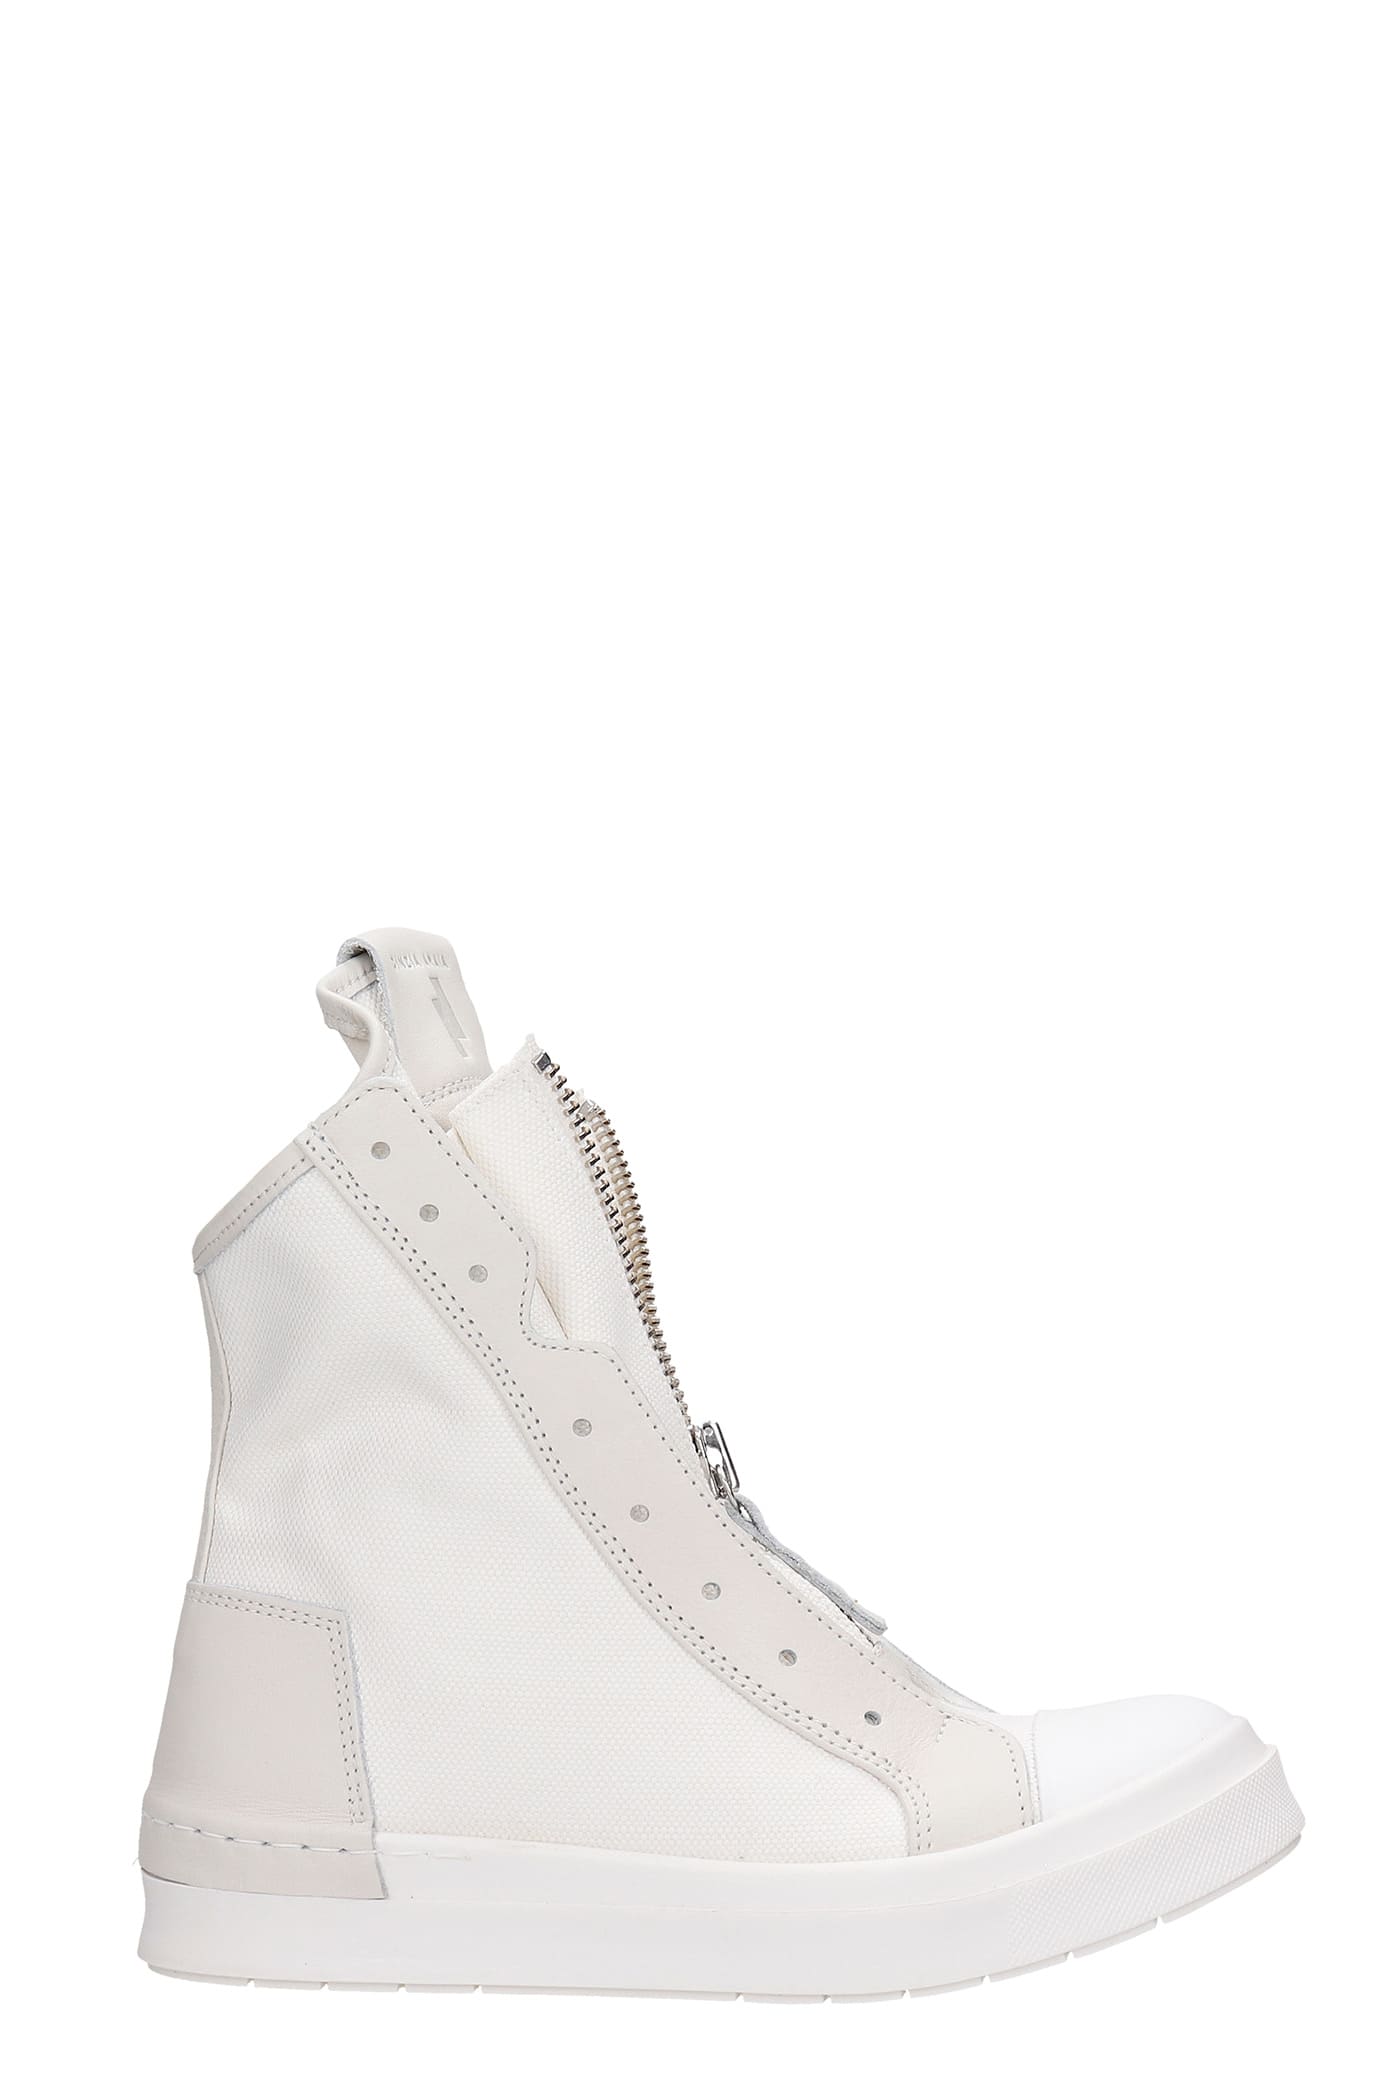 Cinzia Araia Sneakers In White Leather And Fabric